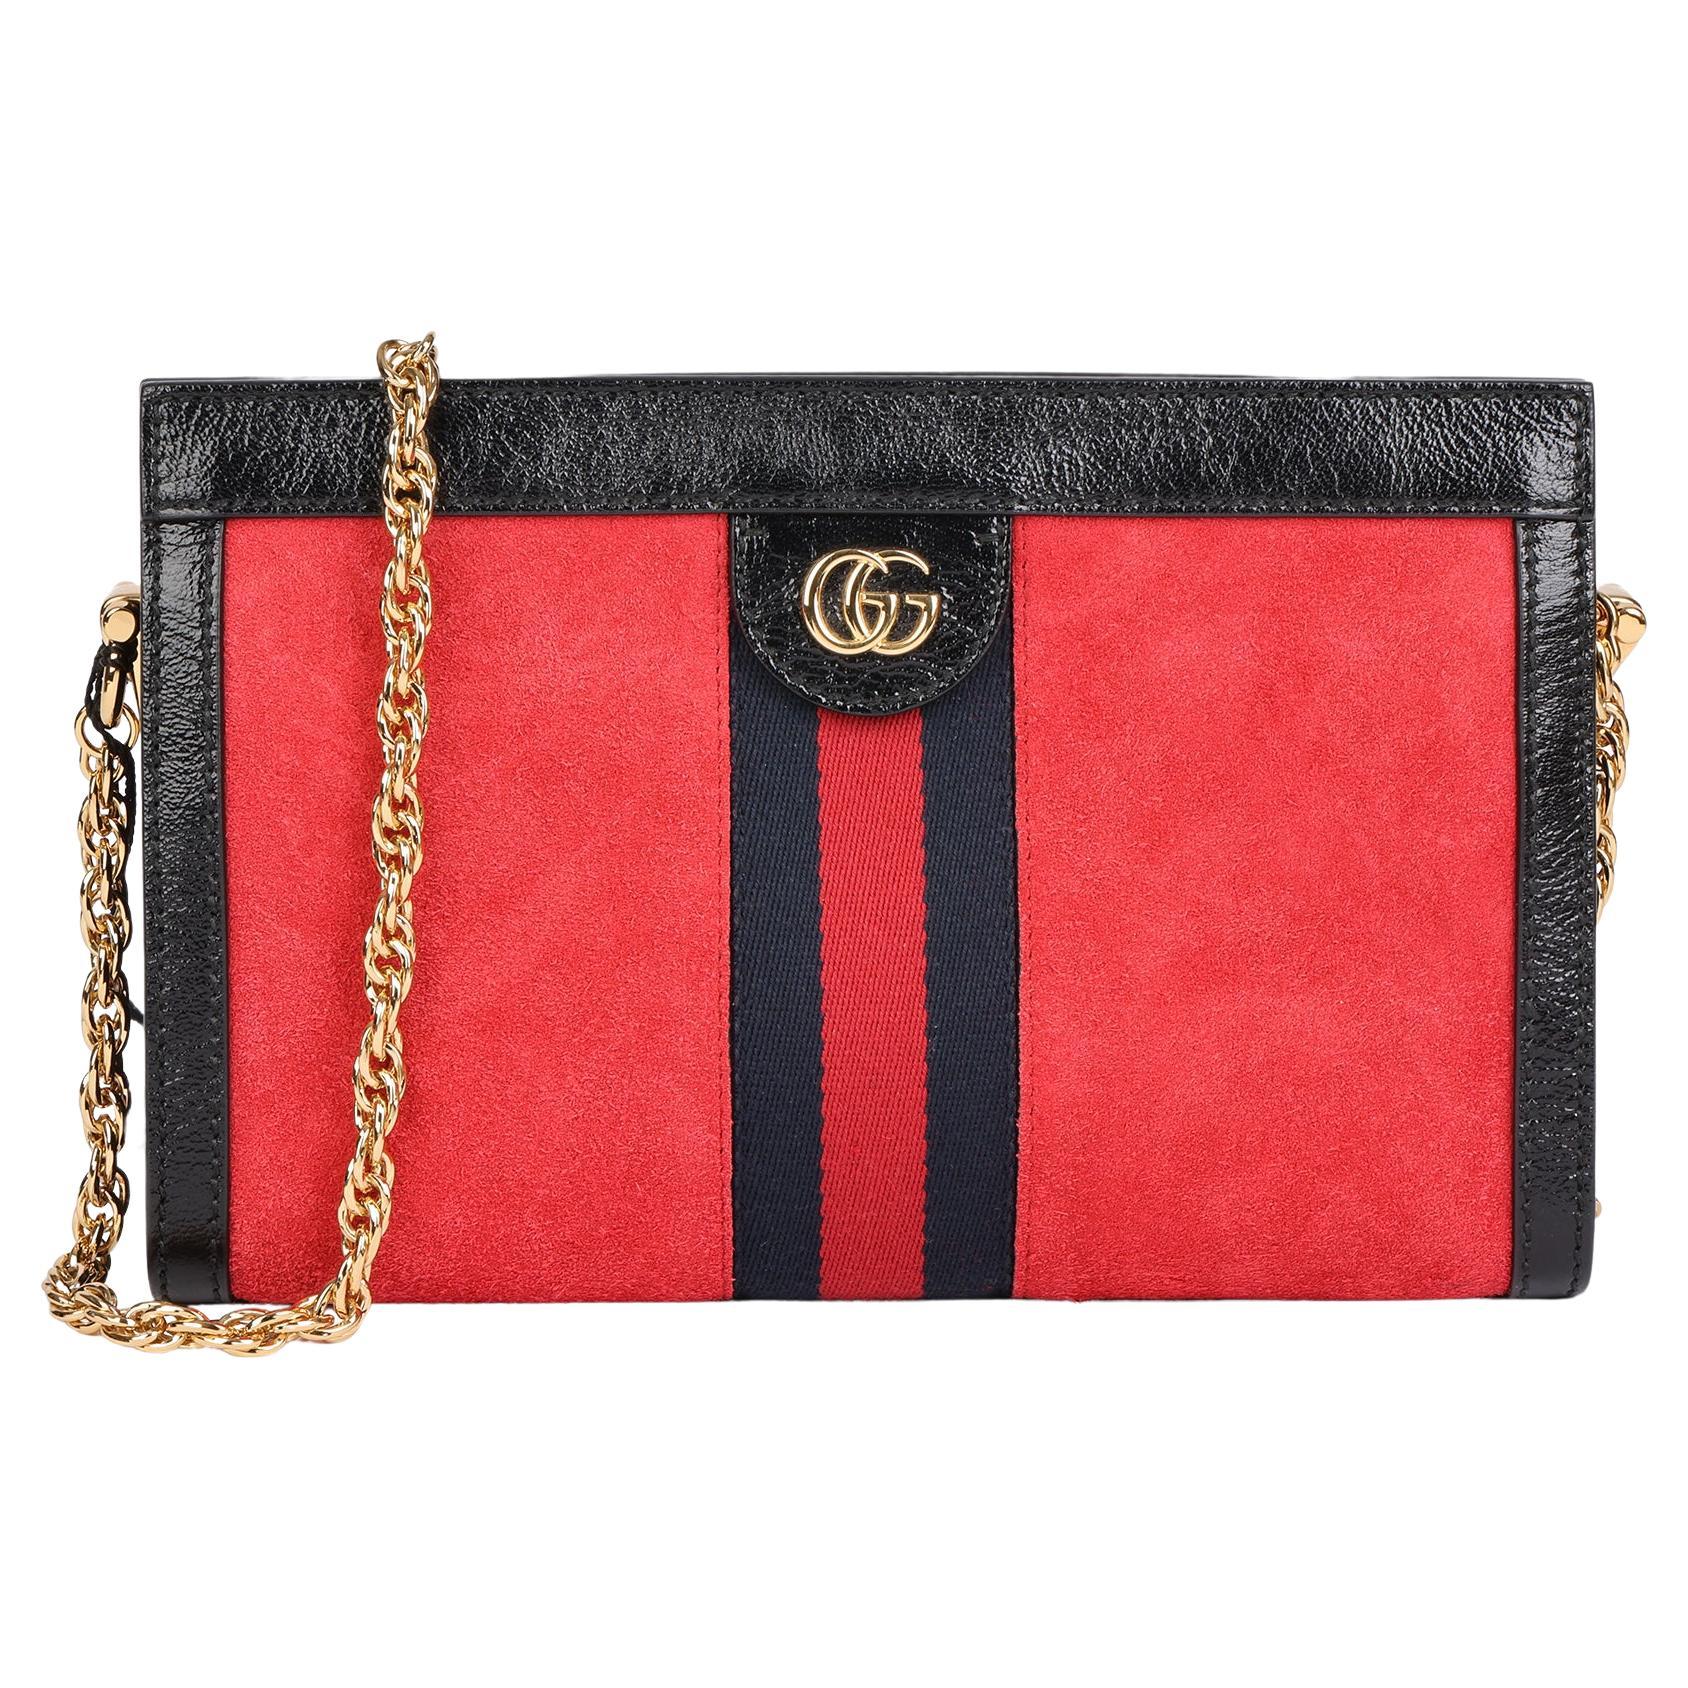 GUCCI Red Suede & Black Patent Leather Orphidia Shoulder Bag